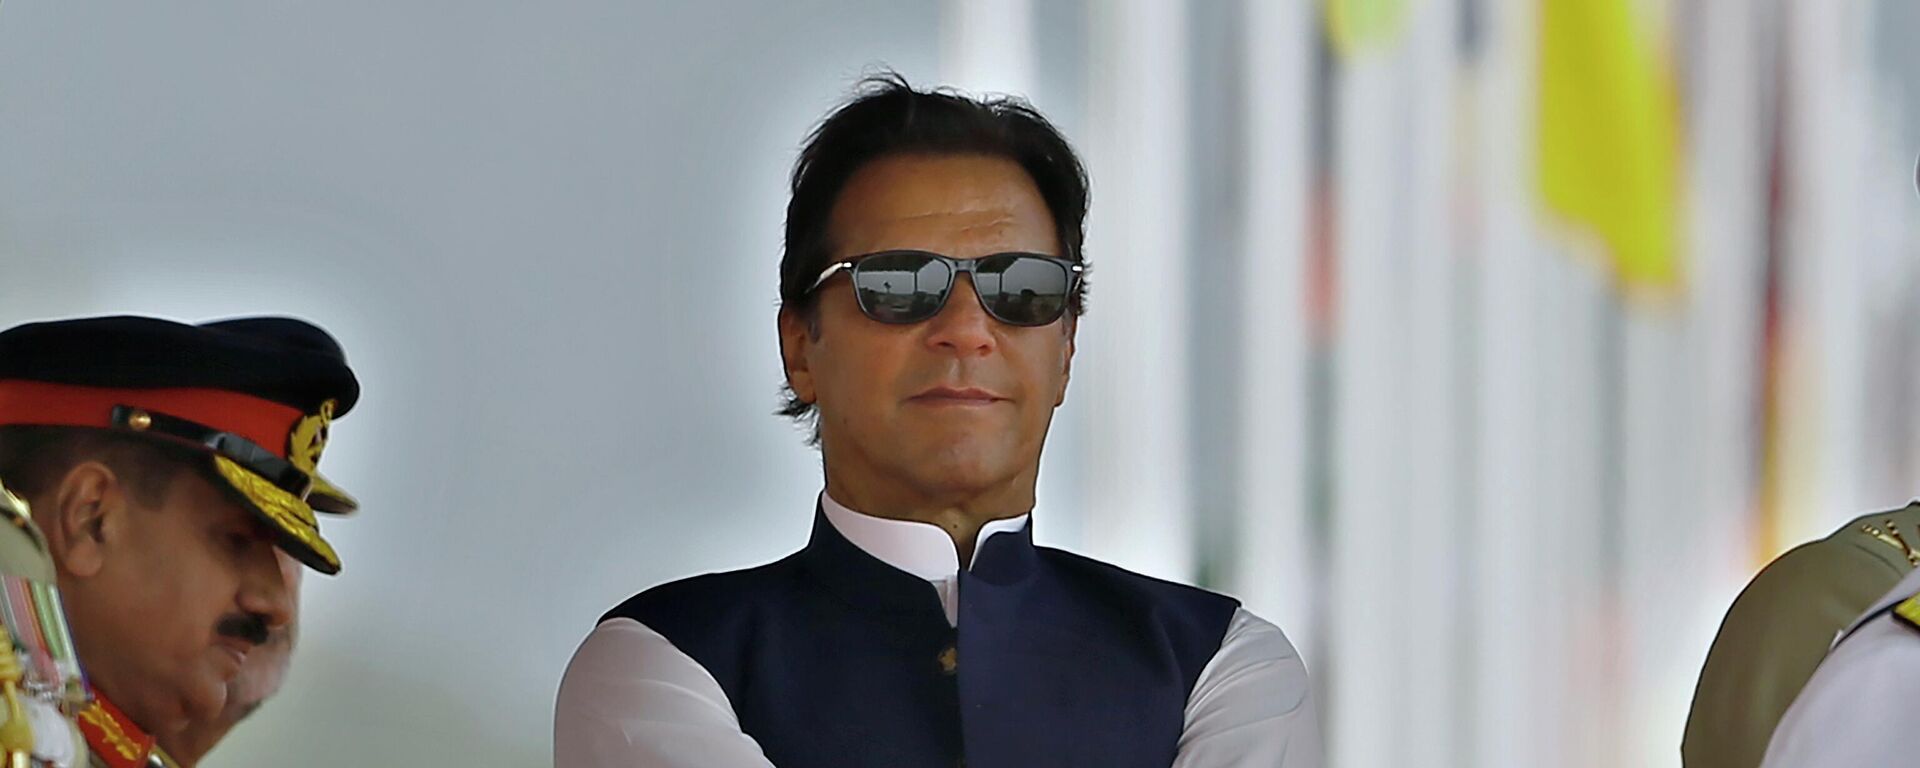 Pakistan's Prime Minister Imran Khan attends a military parade to mark Pakistan National Day, in Islamabad, Pakistan, Wednesday, March 23, 2022. - Sputnik International, 1920, 09.04.2022